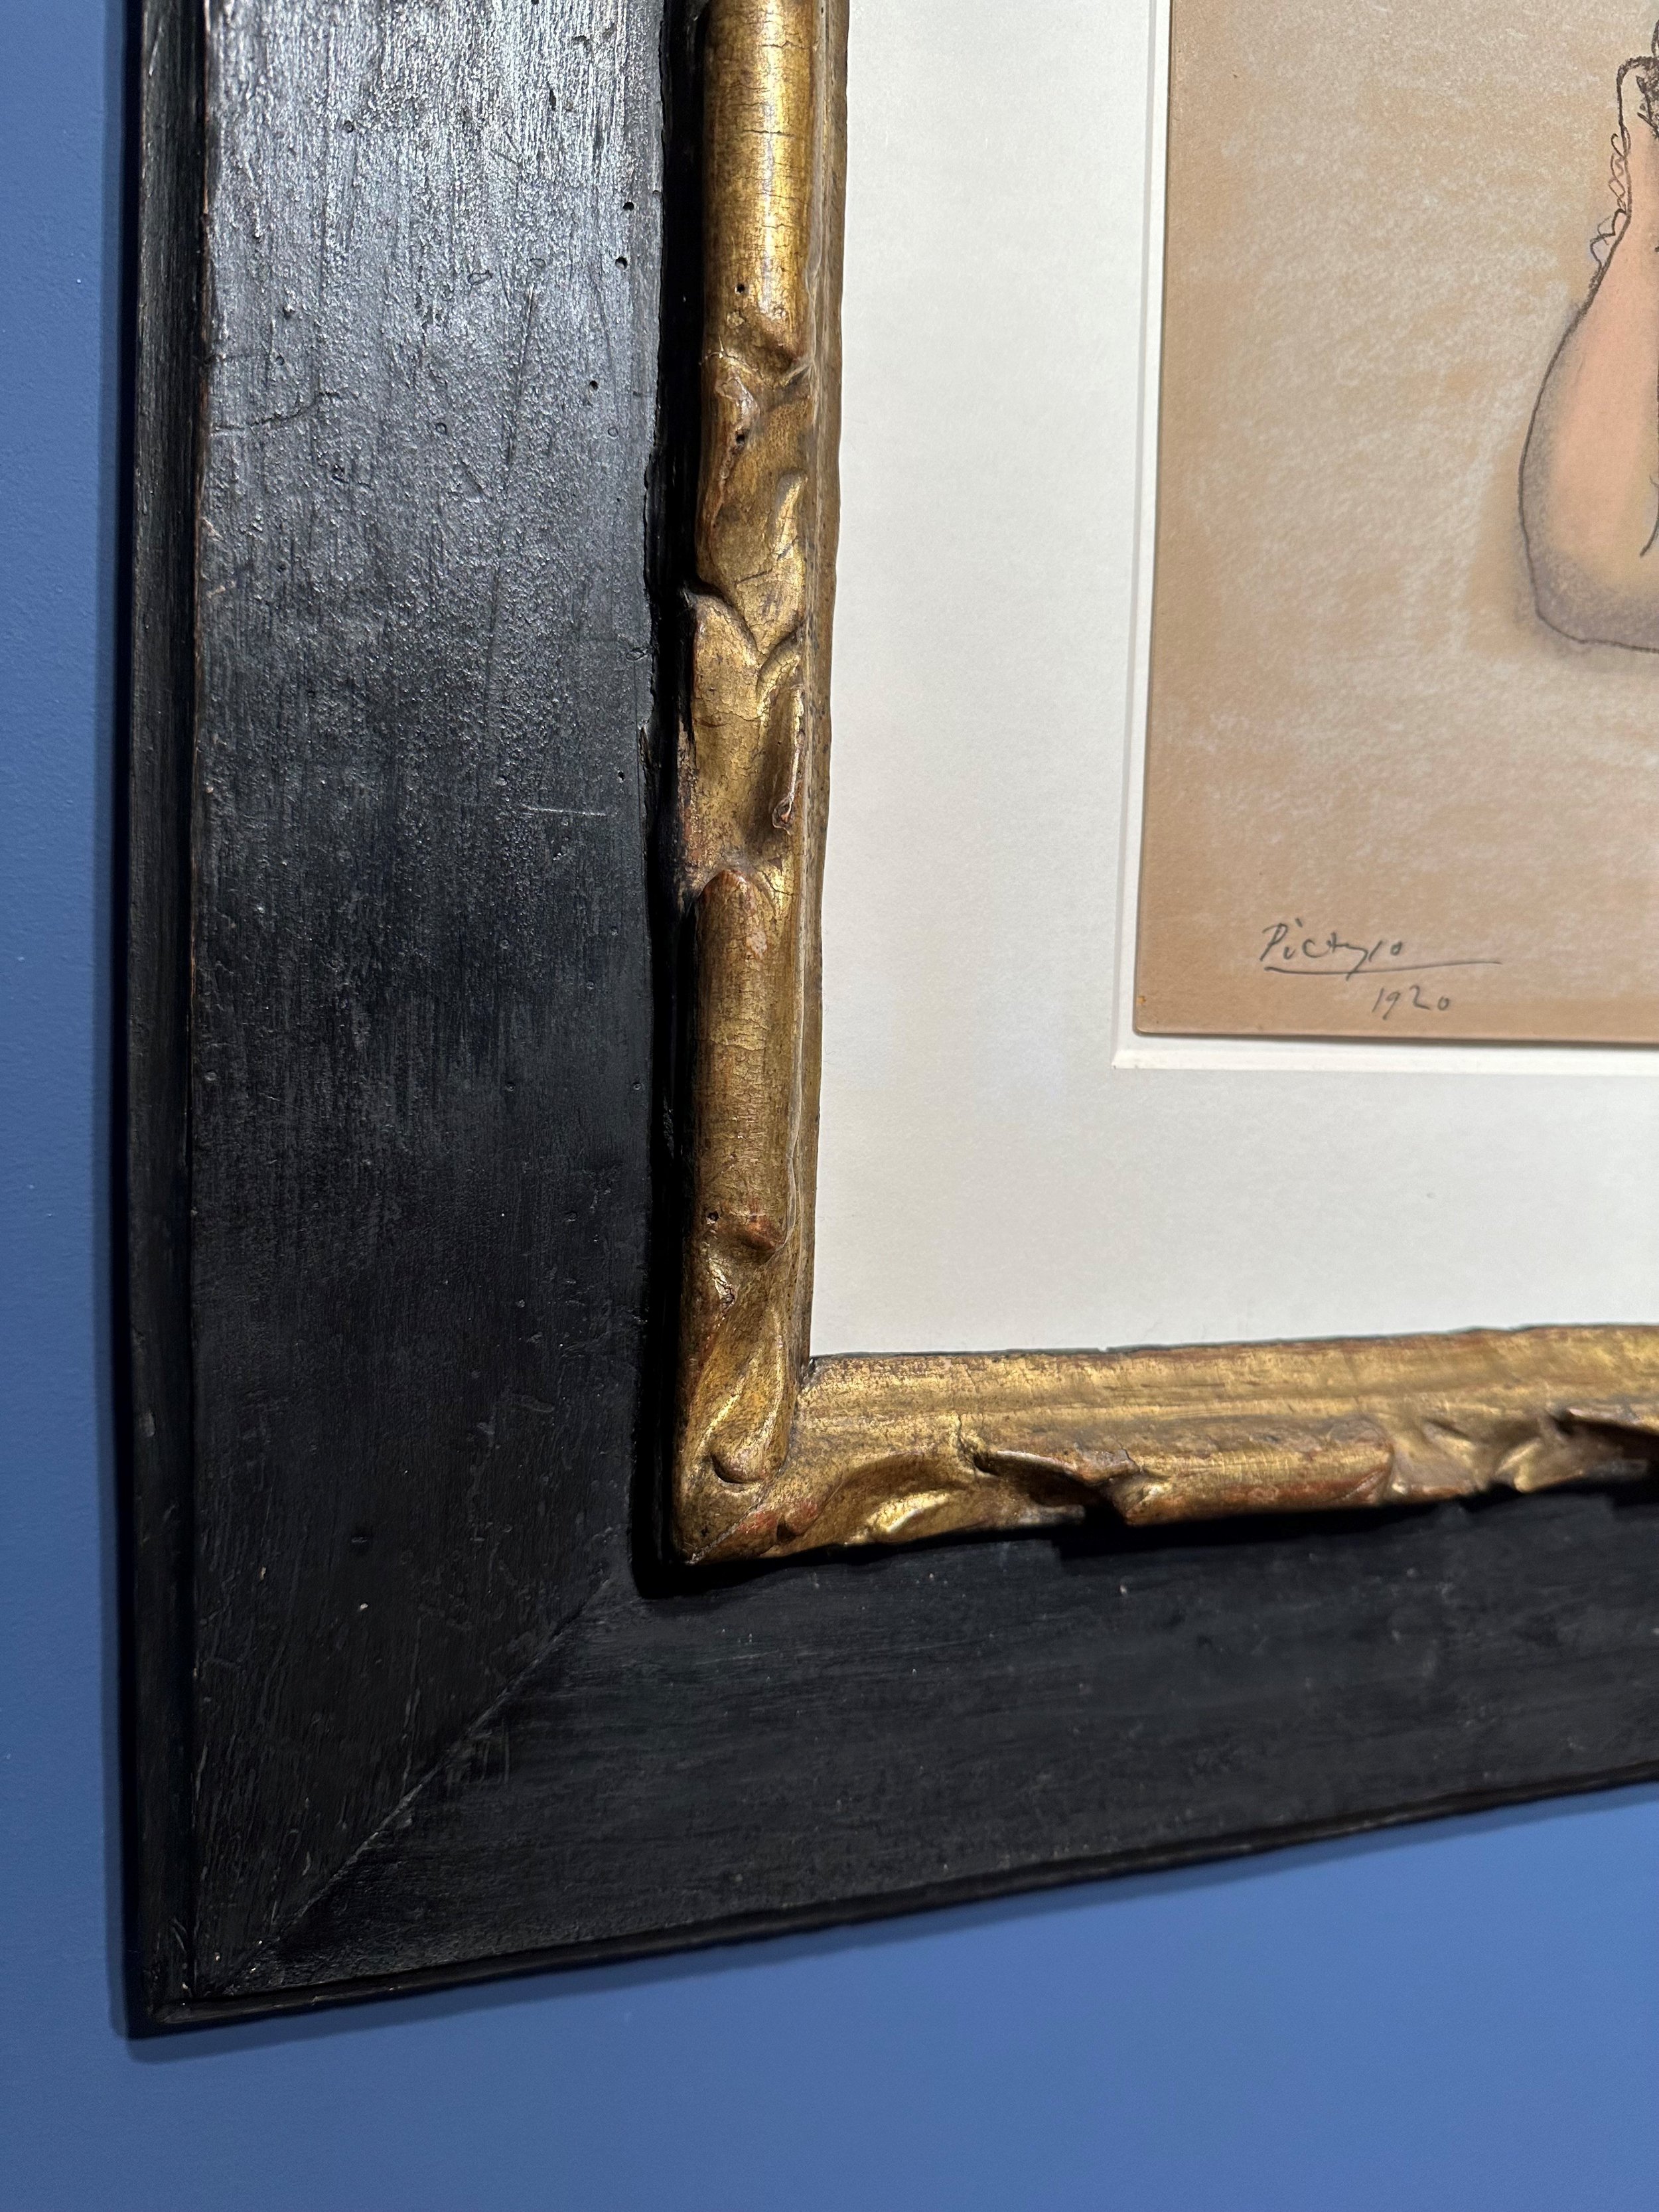 Italian, 17th century, carved and gilded cassetta frame with painted black frieze